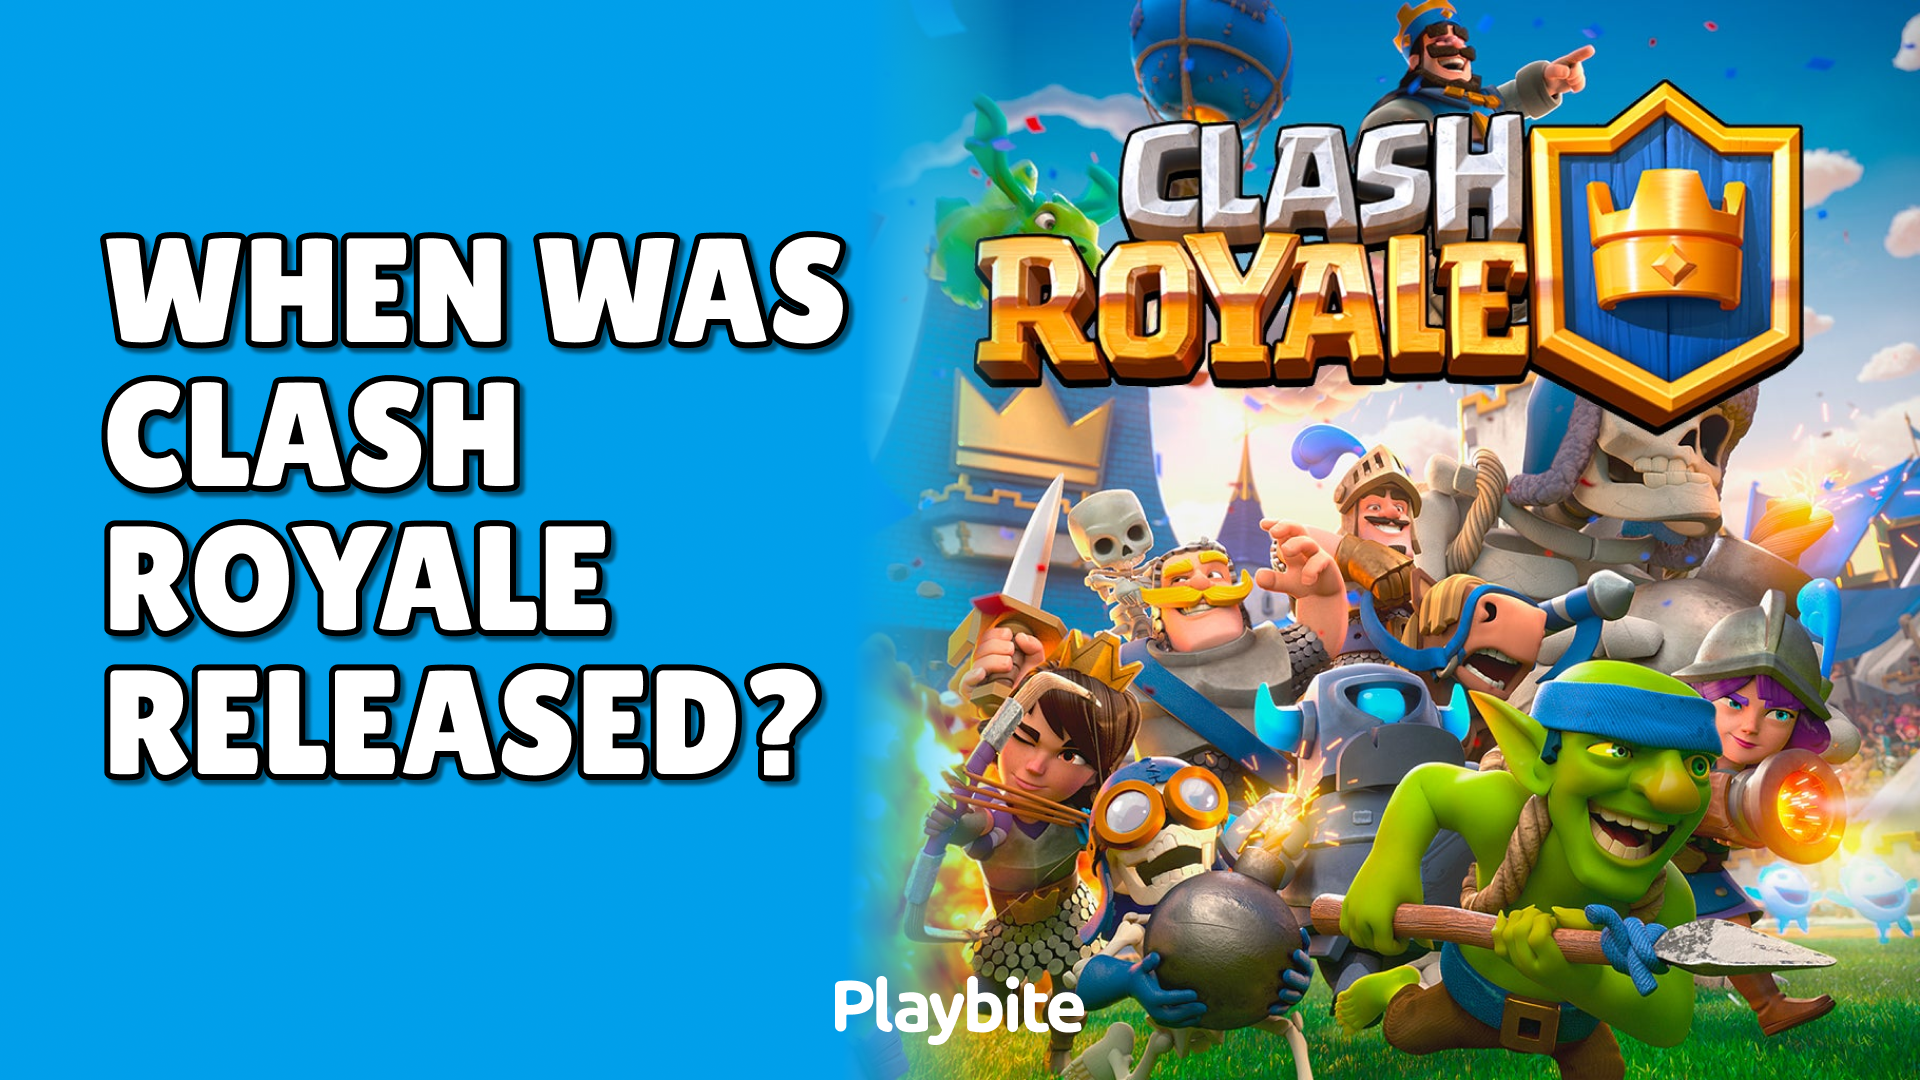 When Was Clash Royale Released?